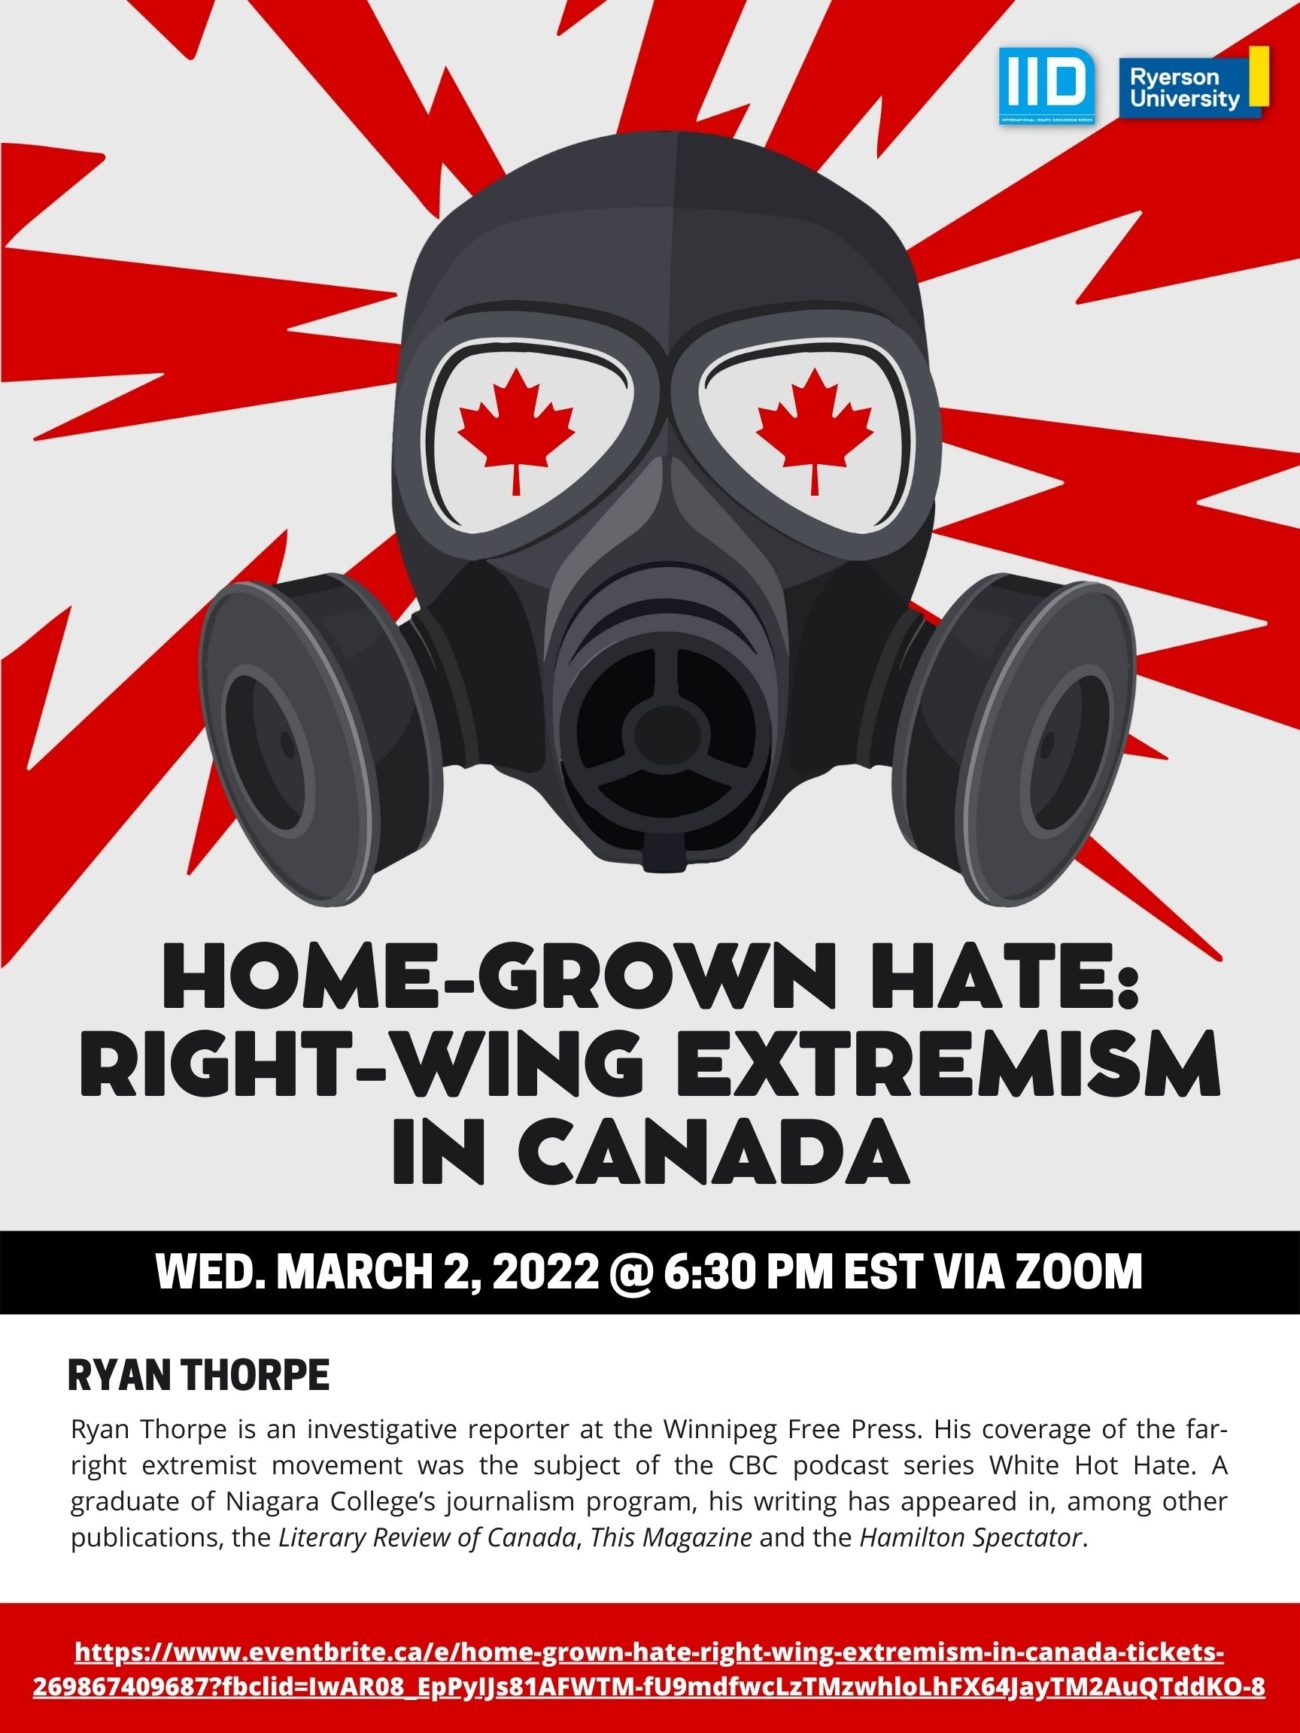 Homegrown Hate: Right-Wing Extremism in Canada